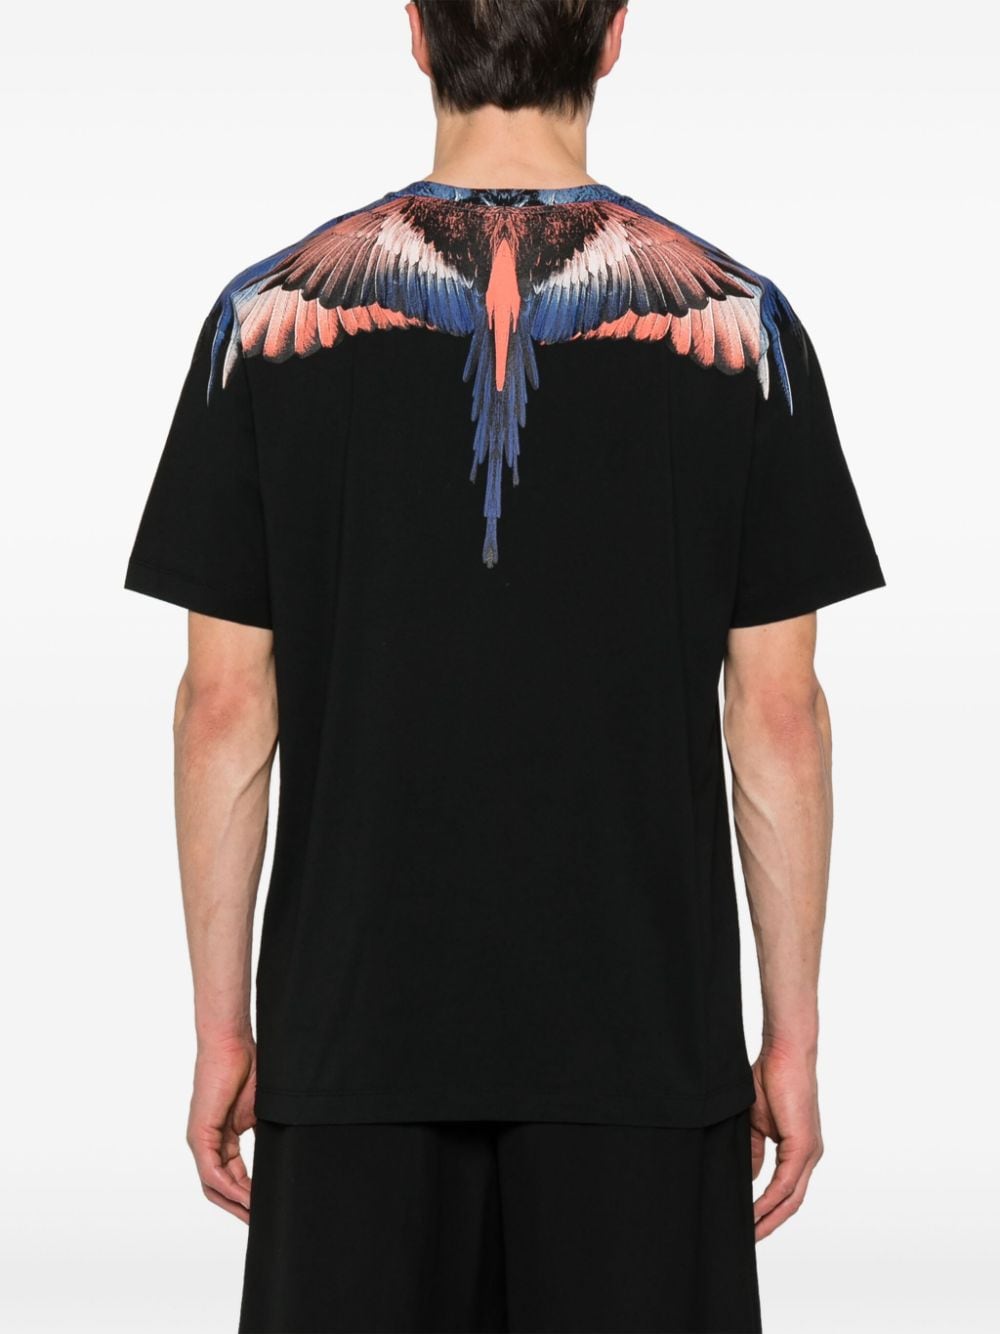 T-shirt nera stampa icon wings multicolor